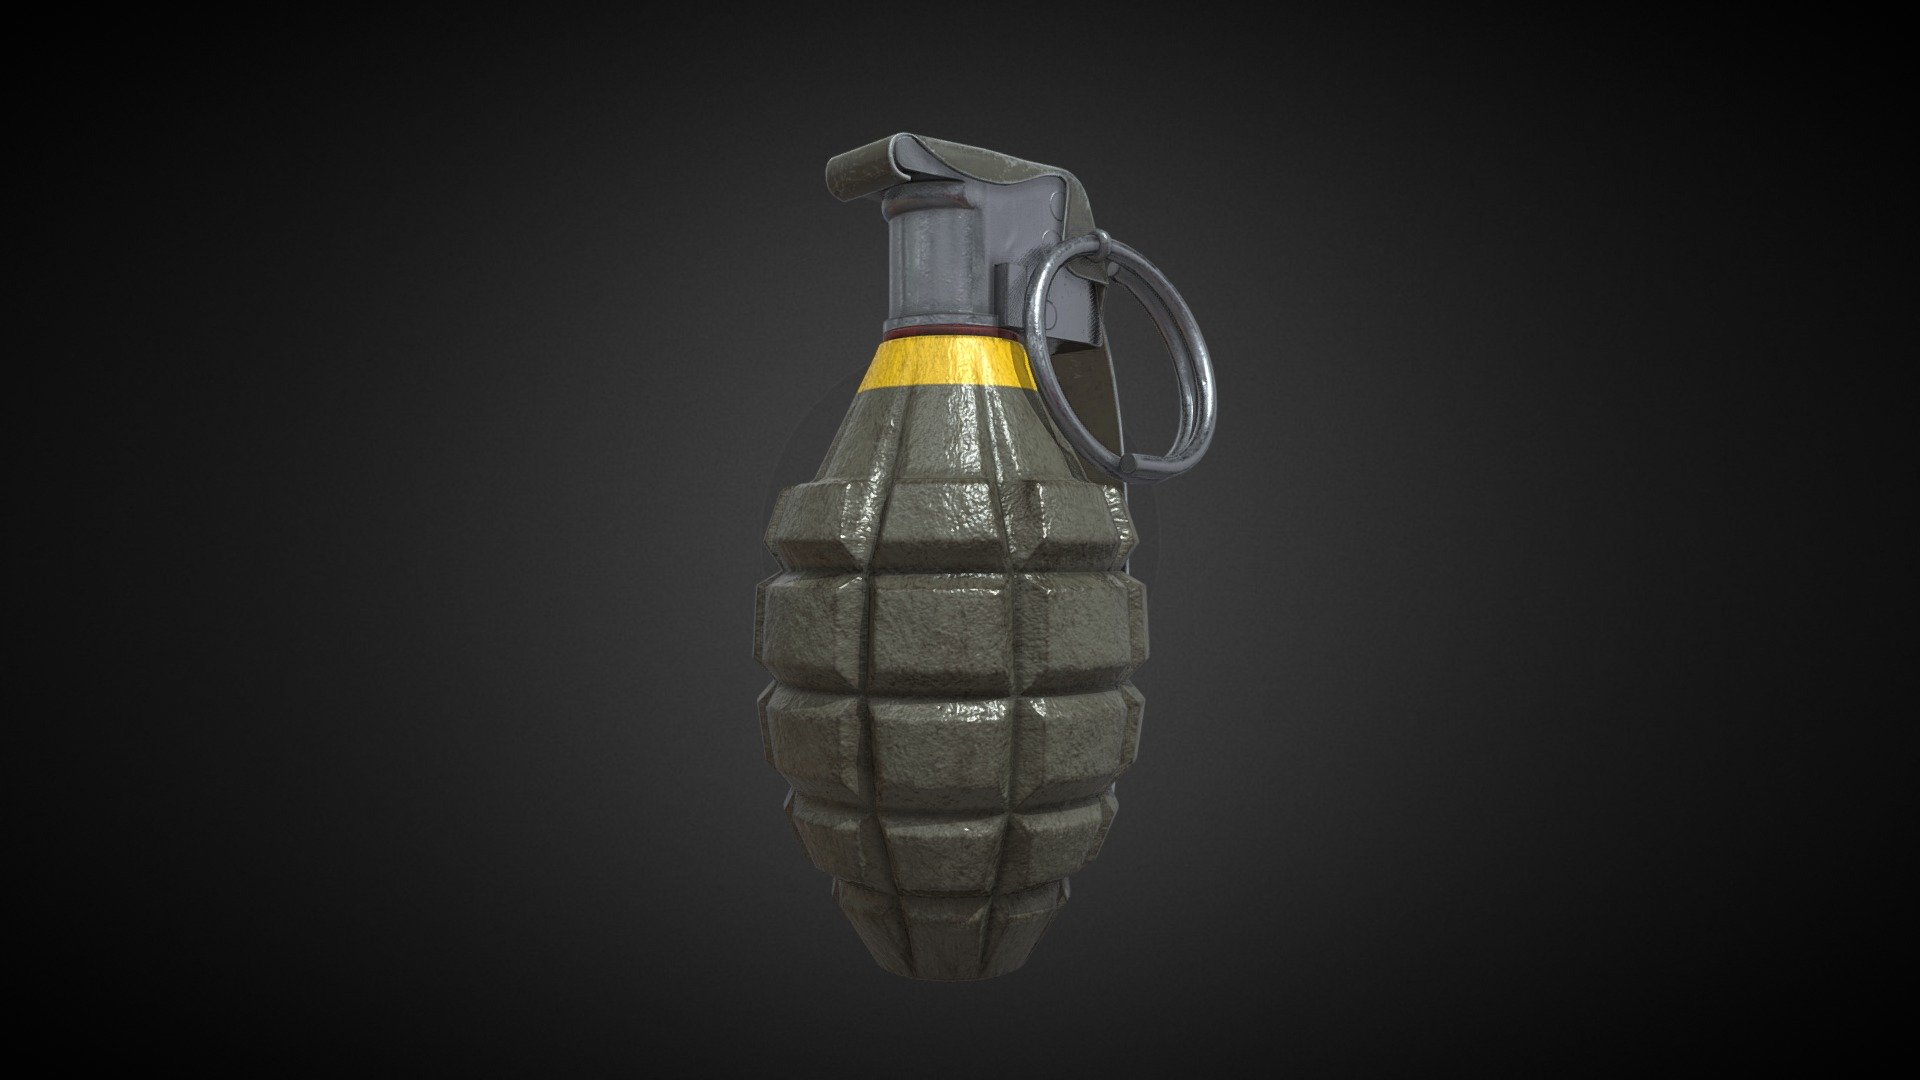 This is the result of my mk2 grenade from Tim Bergholz's free course. Thanks to this I have reviewed modeling concepts and UWVs and I have started to learn substance painter 3d model